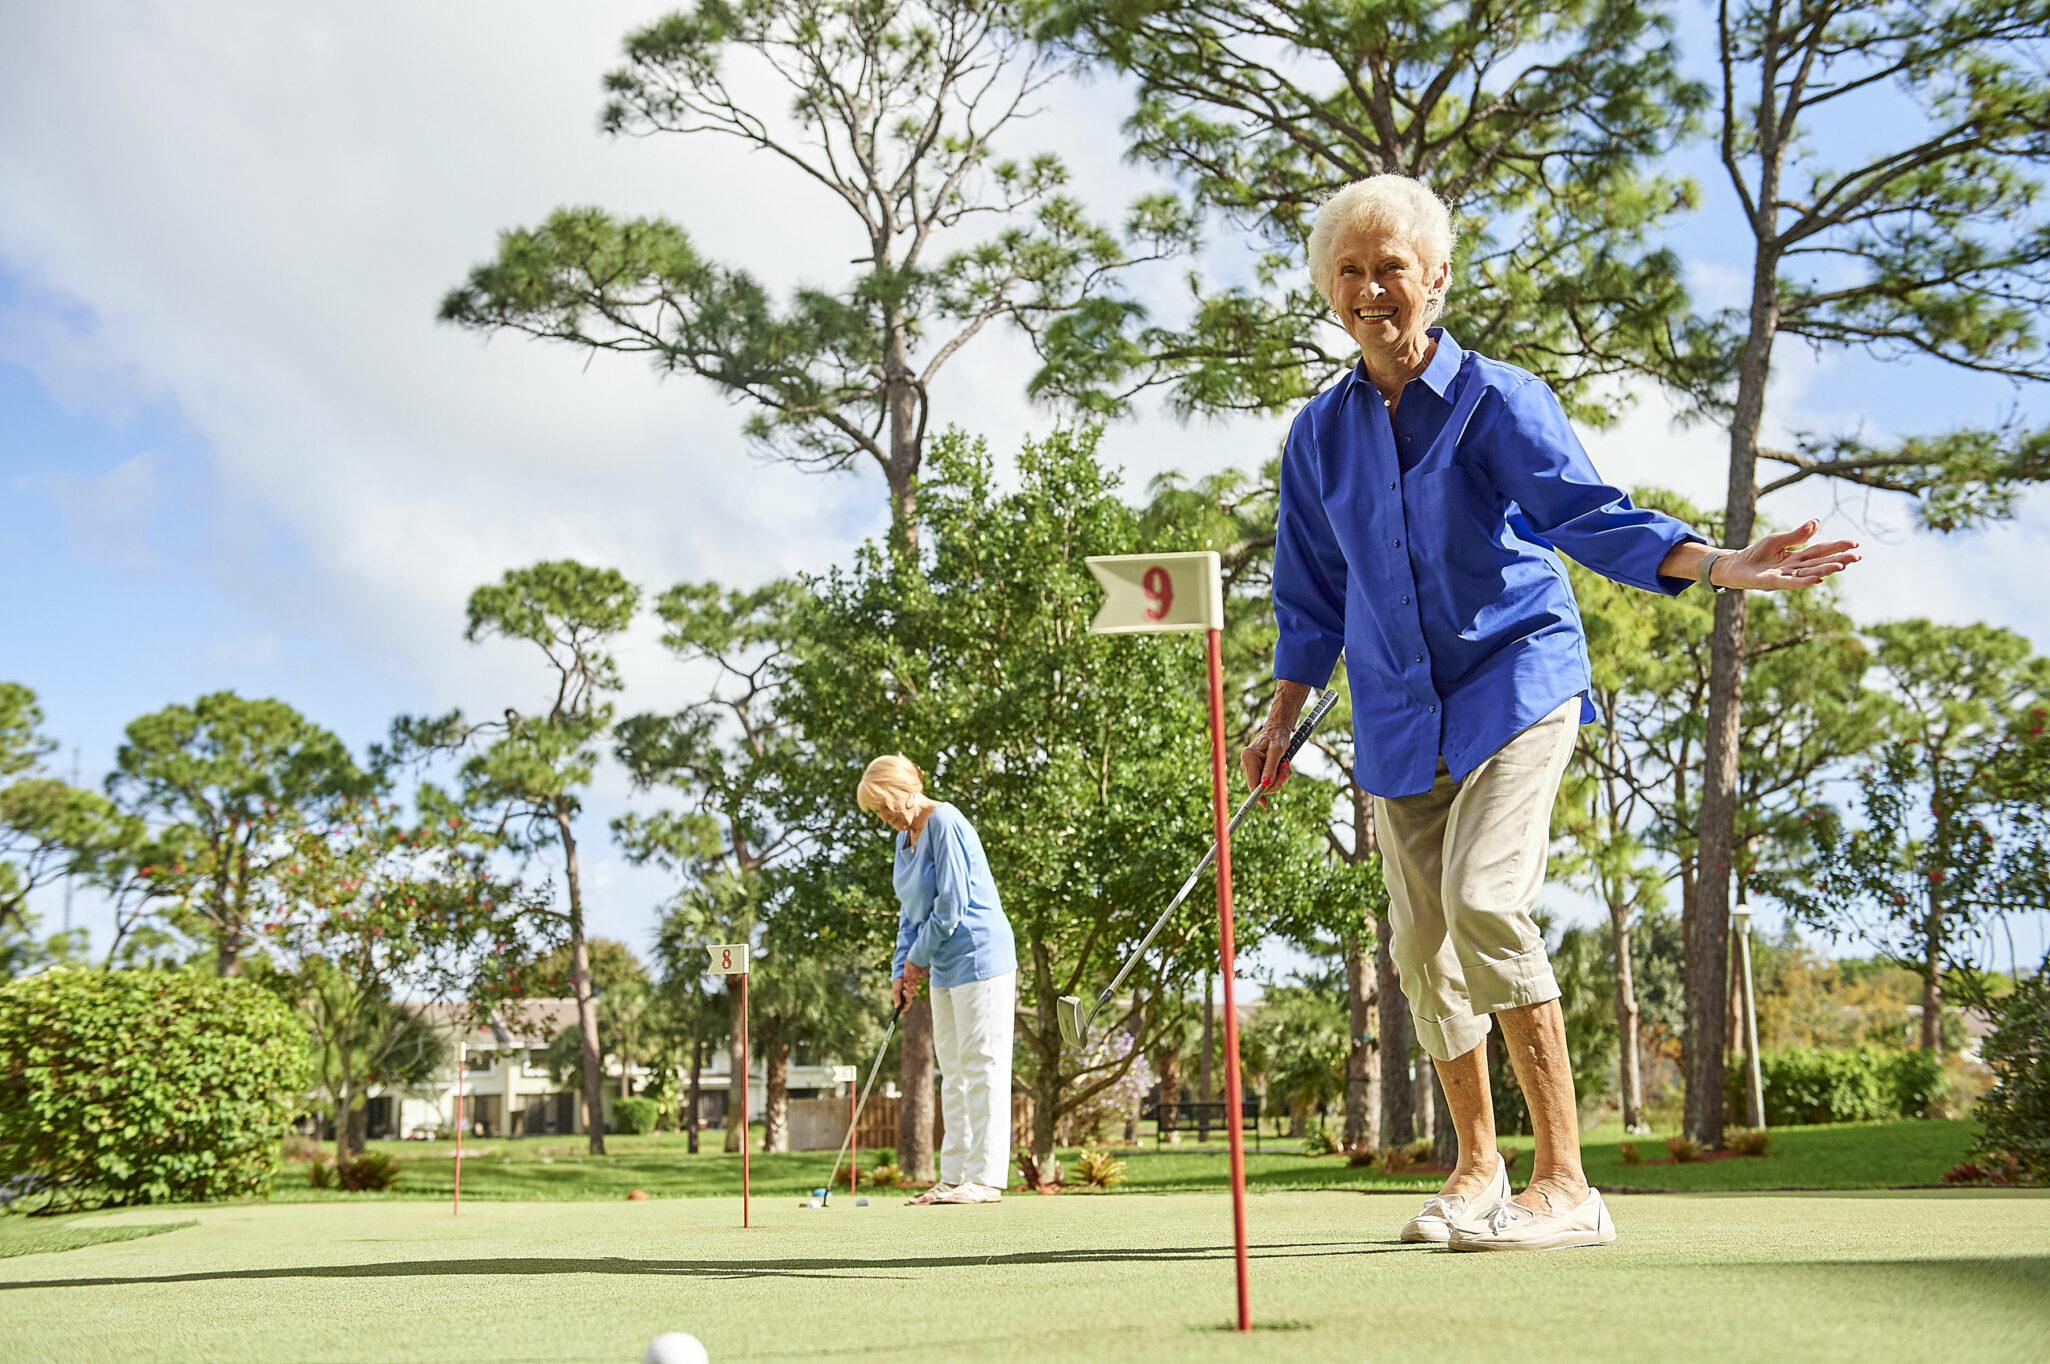 How to Evaluate Services & Amenities in Your Senior Living Search